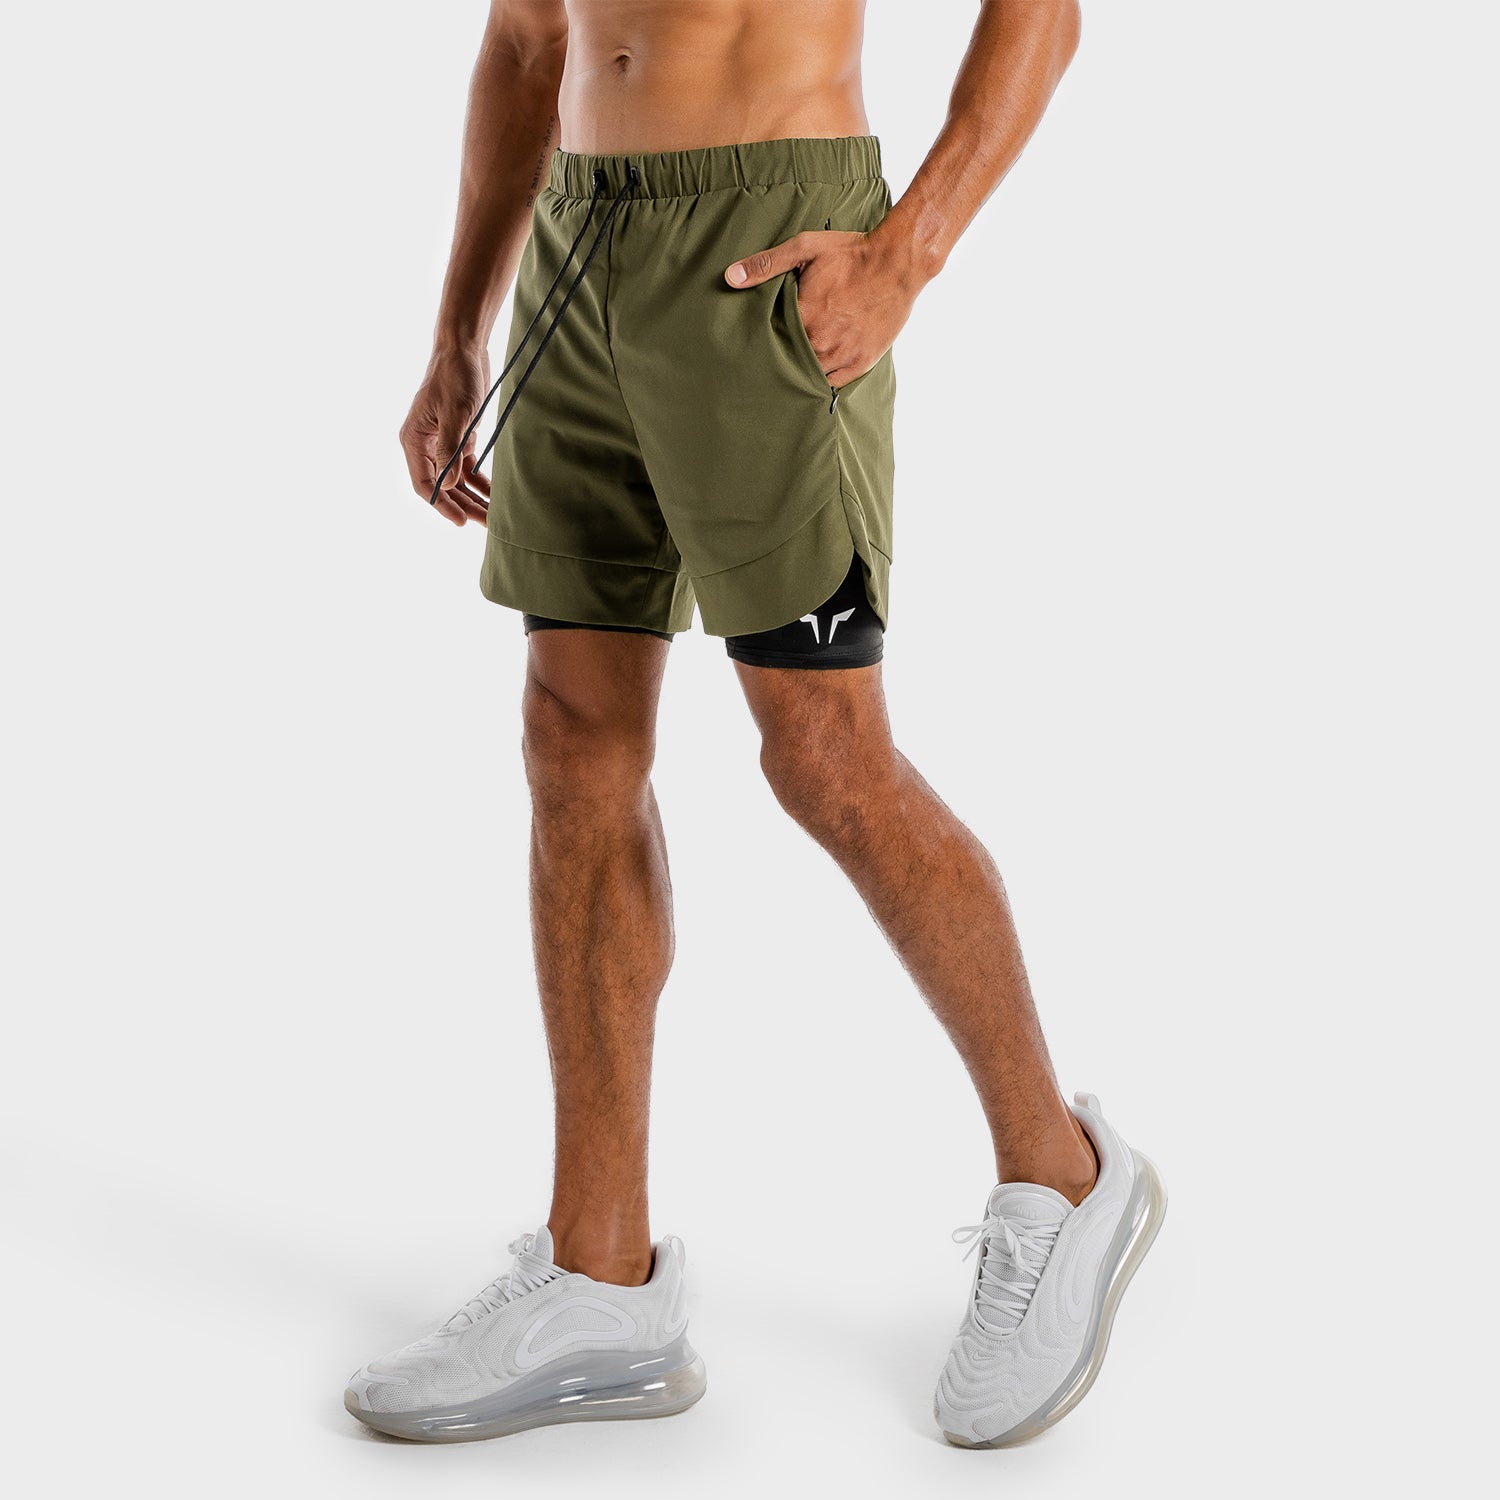 Limitless 2-in-1 Shorts - Khaki And Black